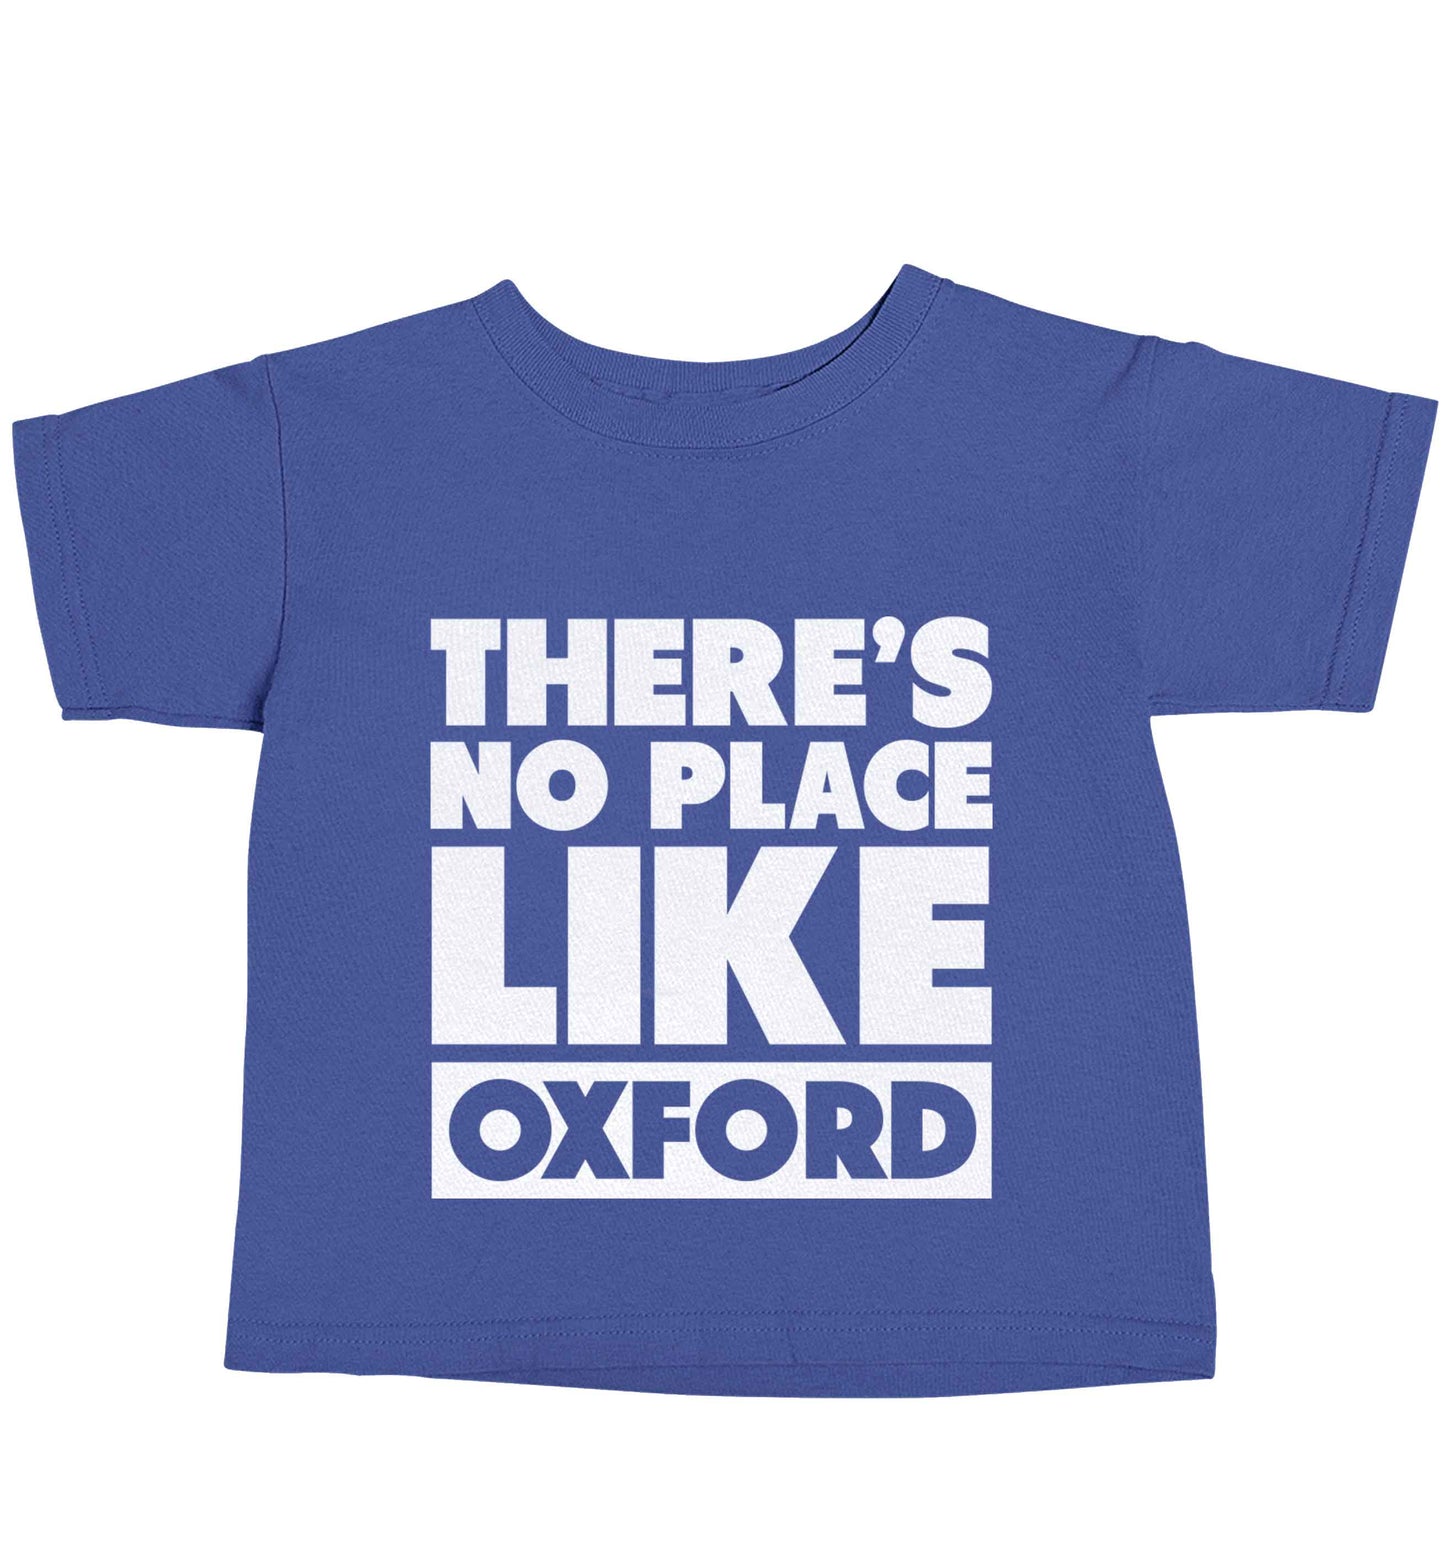 There's no place like Oxford blue baby toddler Tshirt 2 Years